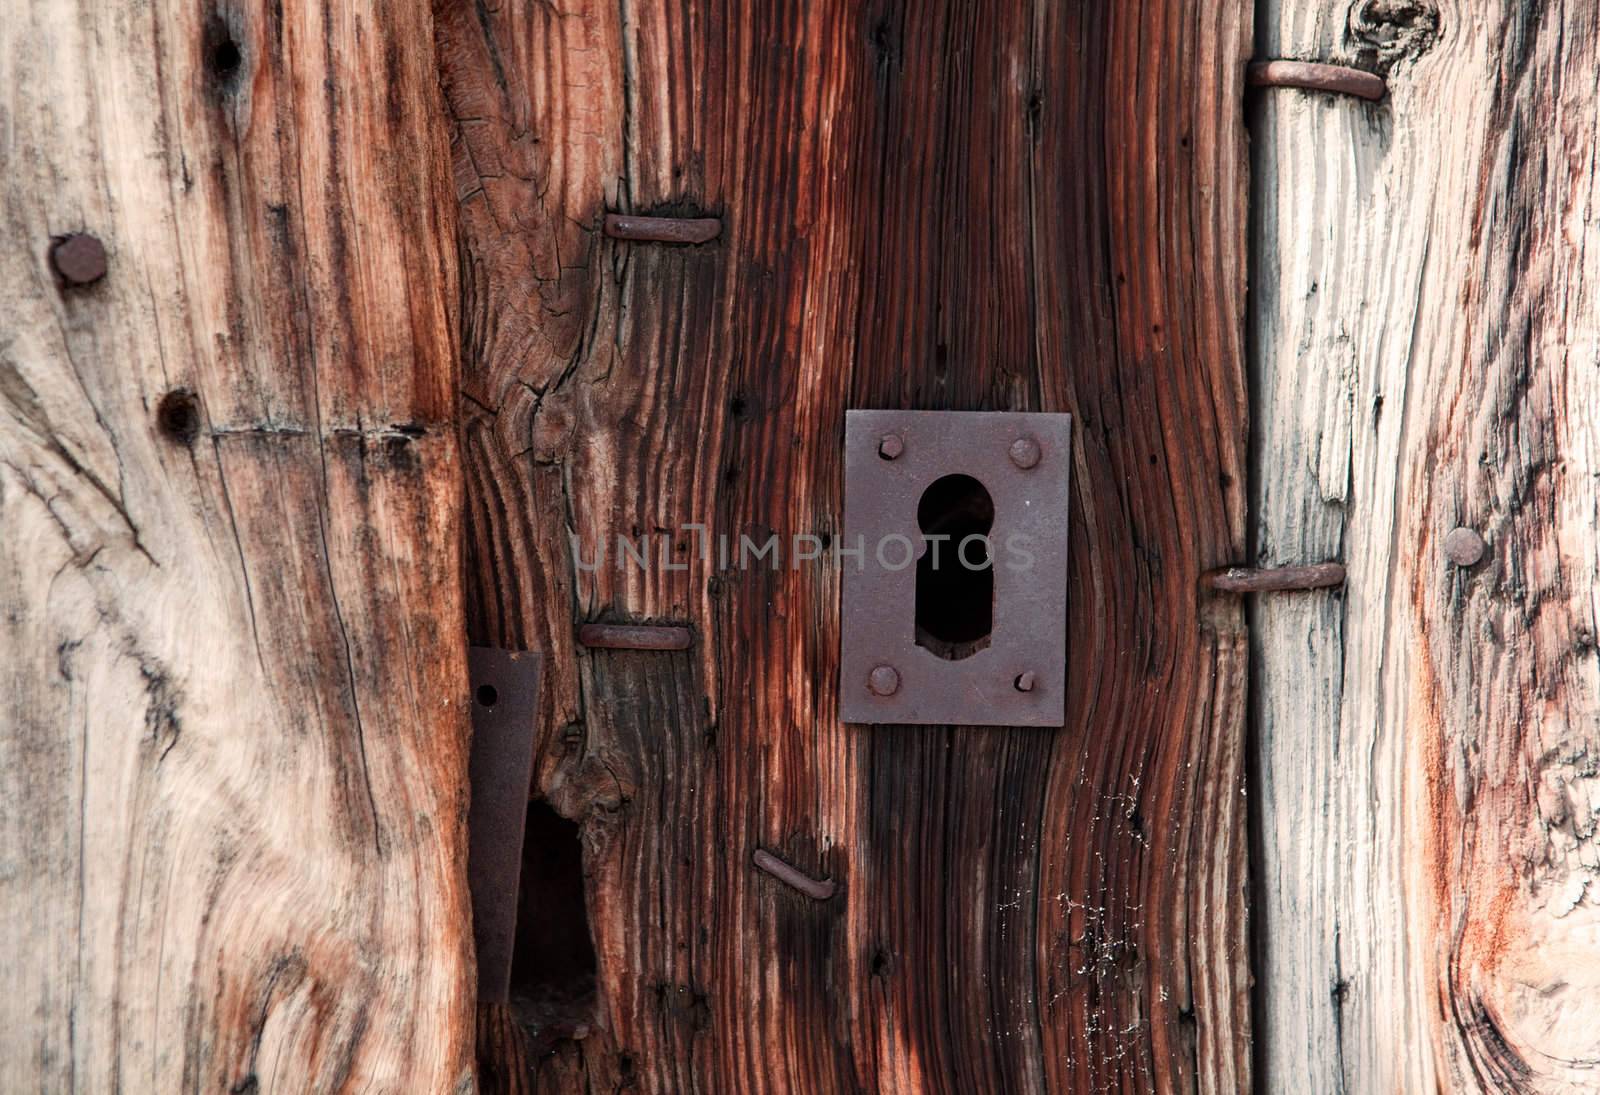 Close up image of Old lock and wood door